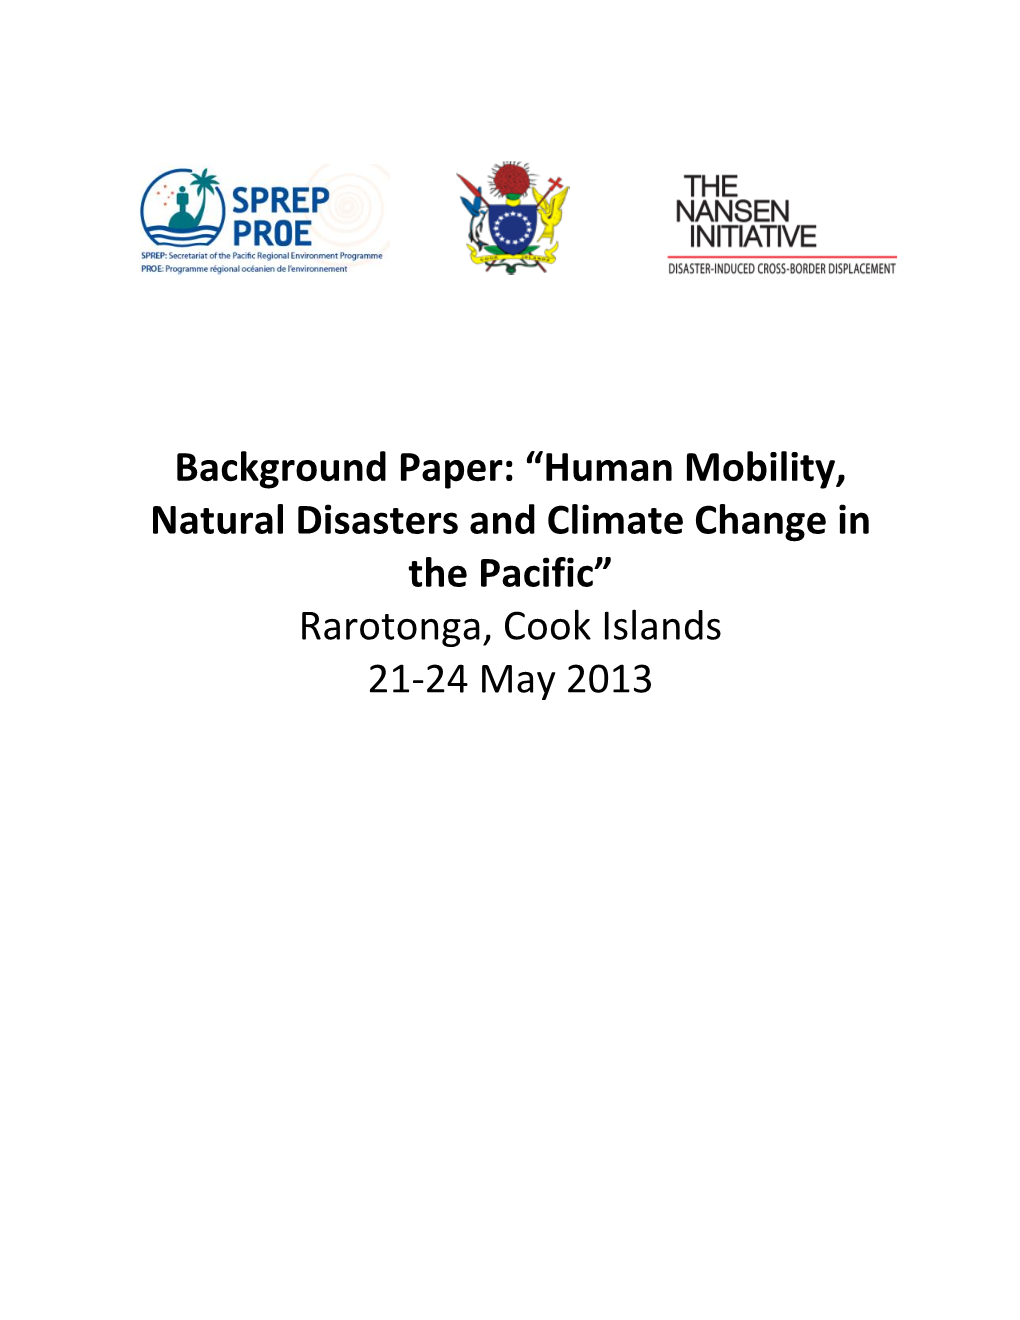 Background Paper: “Human Mobility, Natural Disasters and Climate Change in the Pacific” Rarotonga, Cook Islands 21-24 May 2013